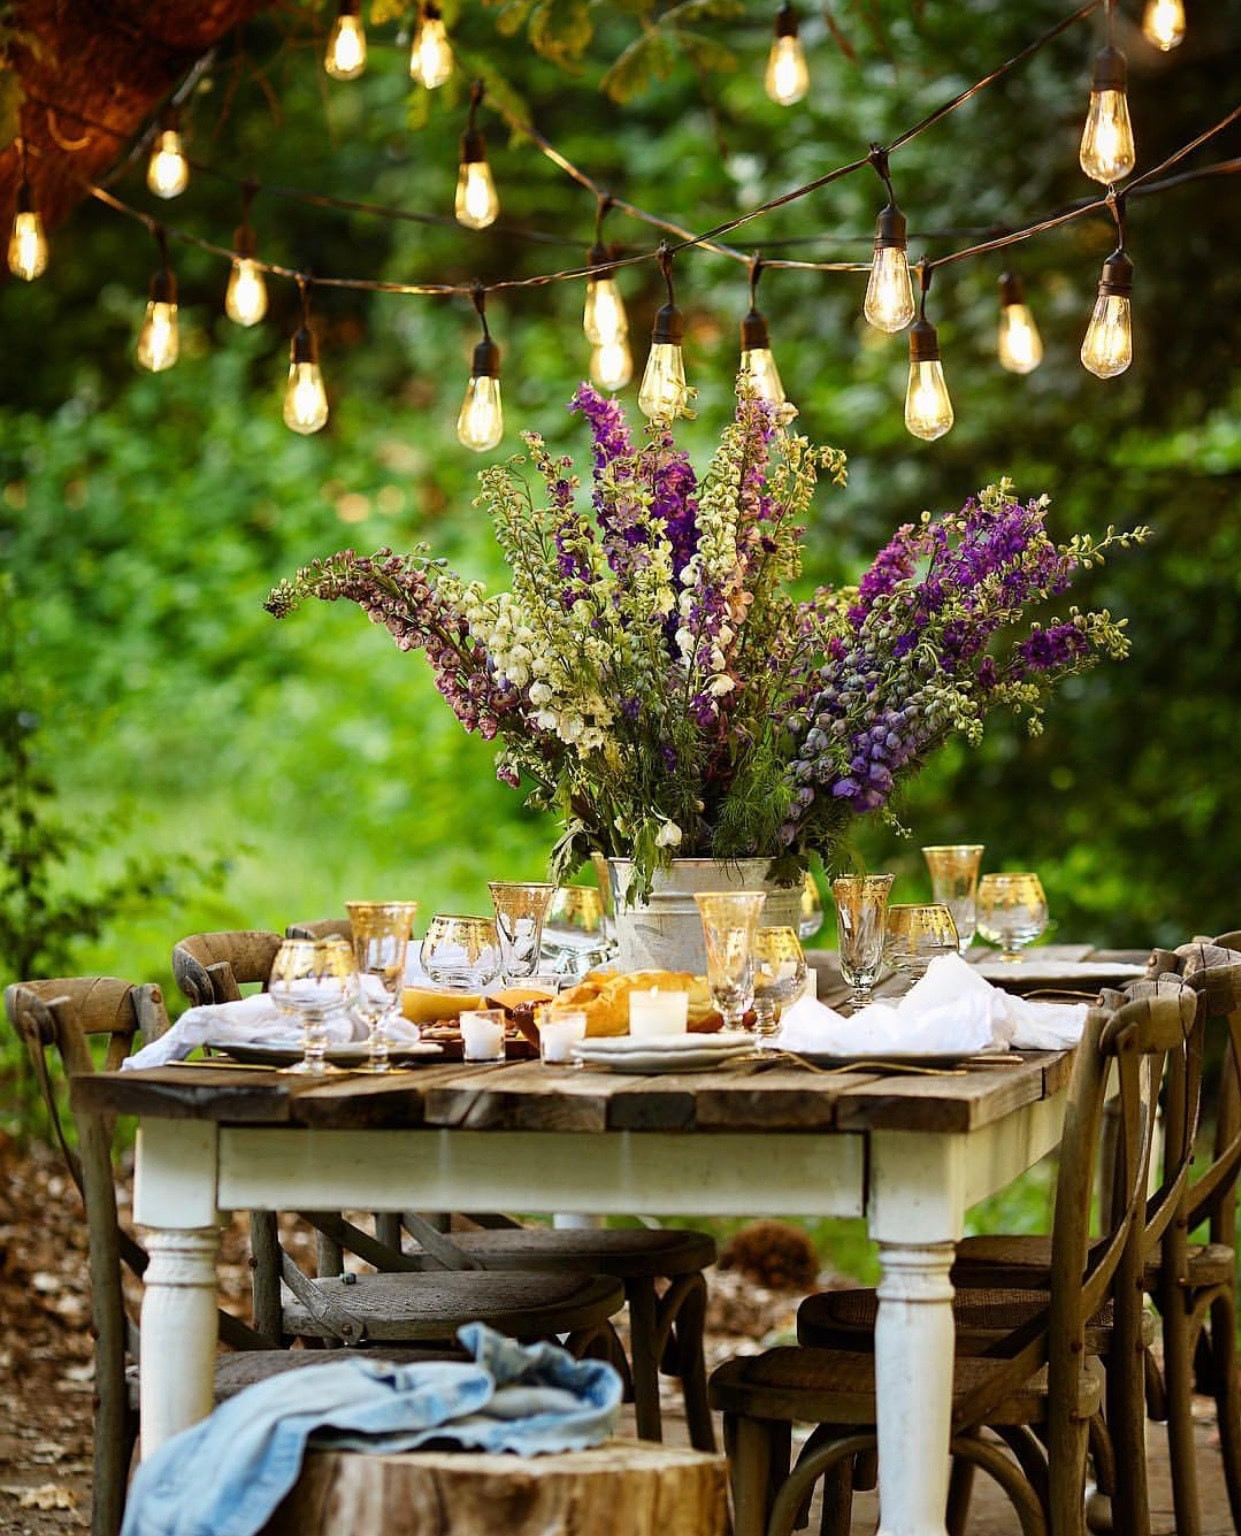 Backyard Birthday Party Decorating Ideas
 8 Charming outdoor party decoration ideas